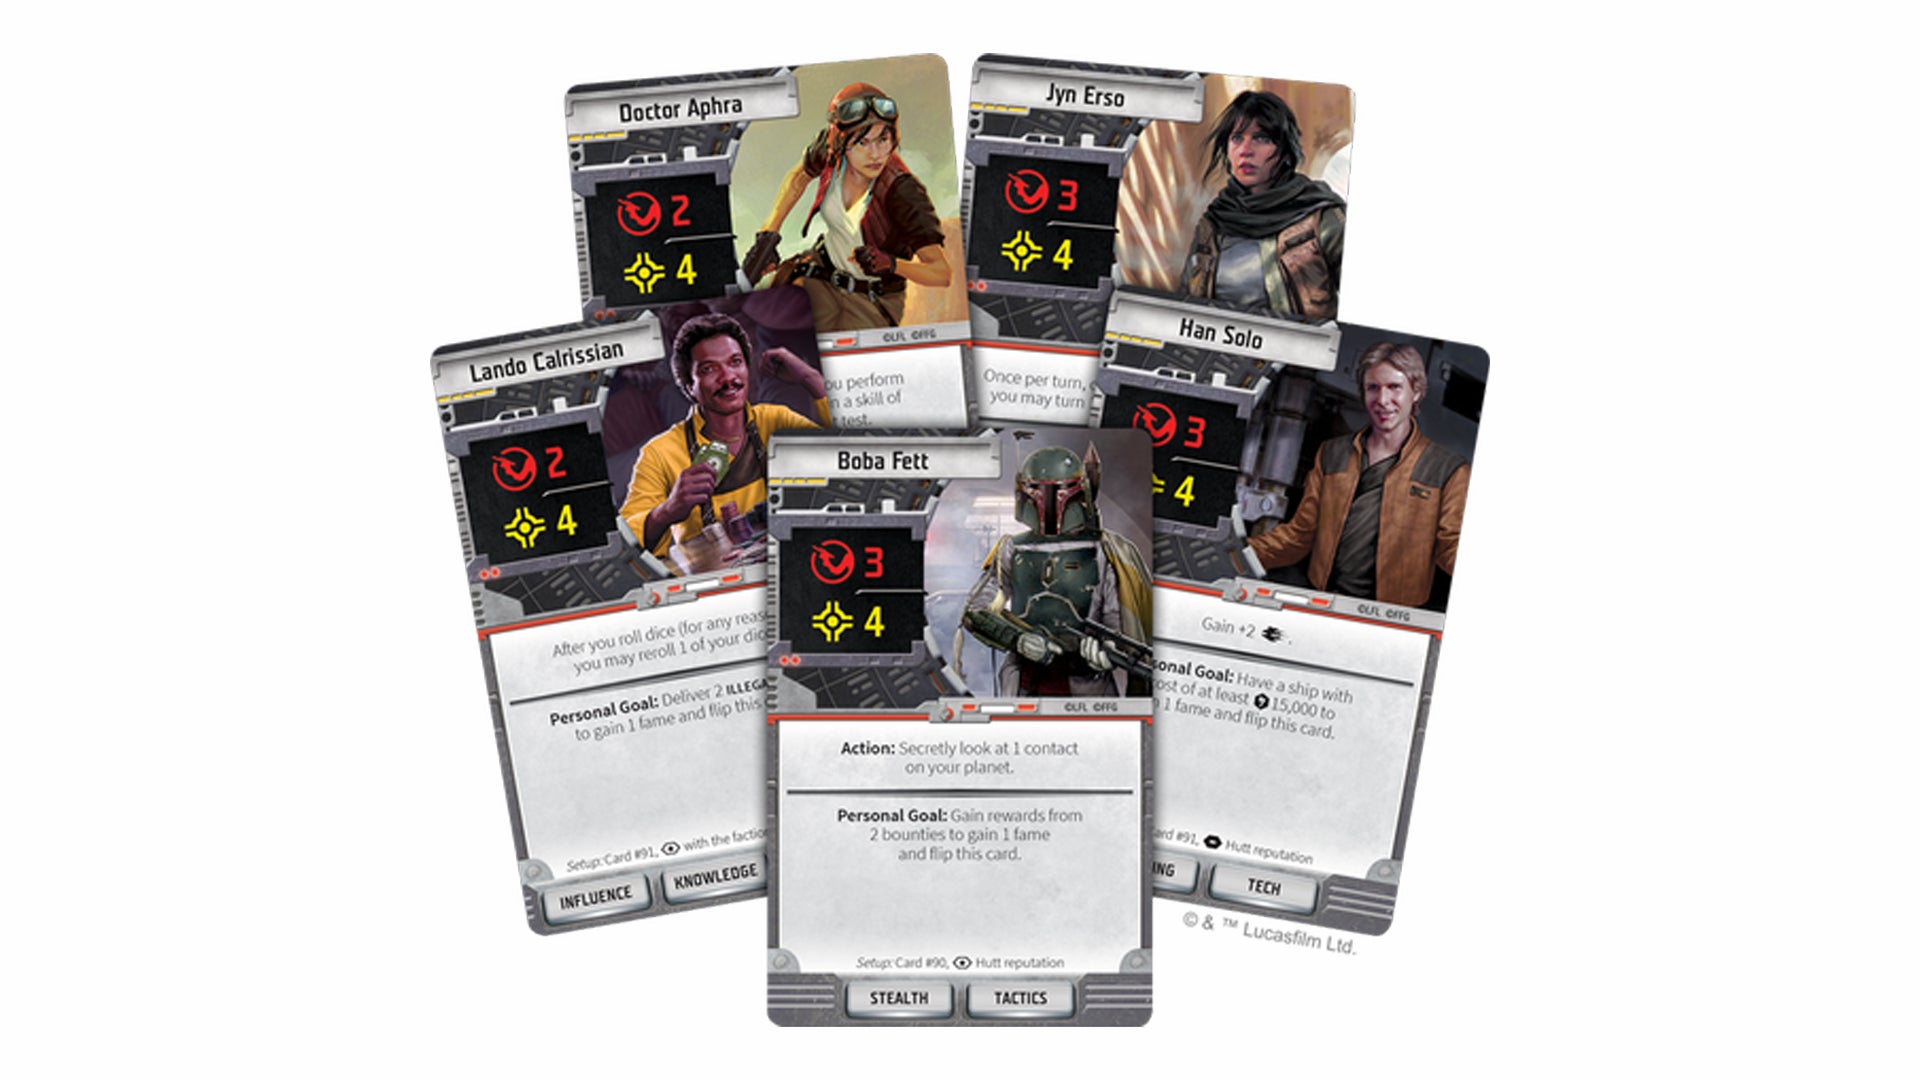 Star Wars: Outer Rim board game cards